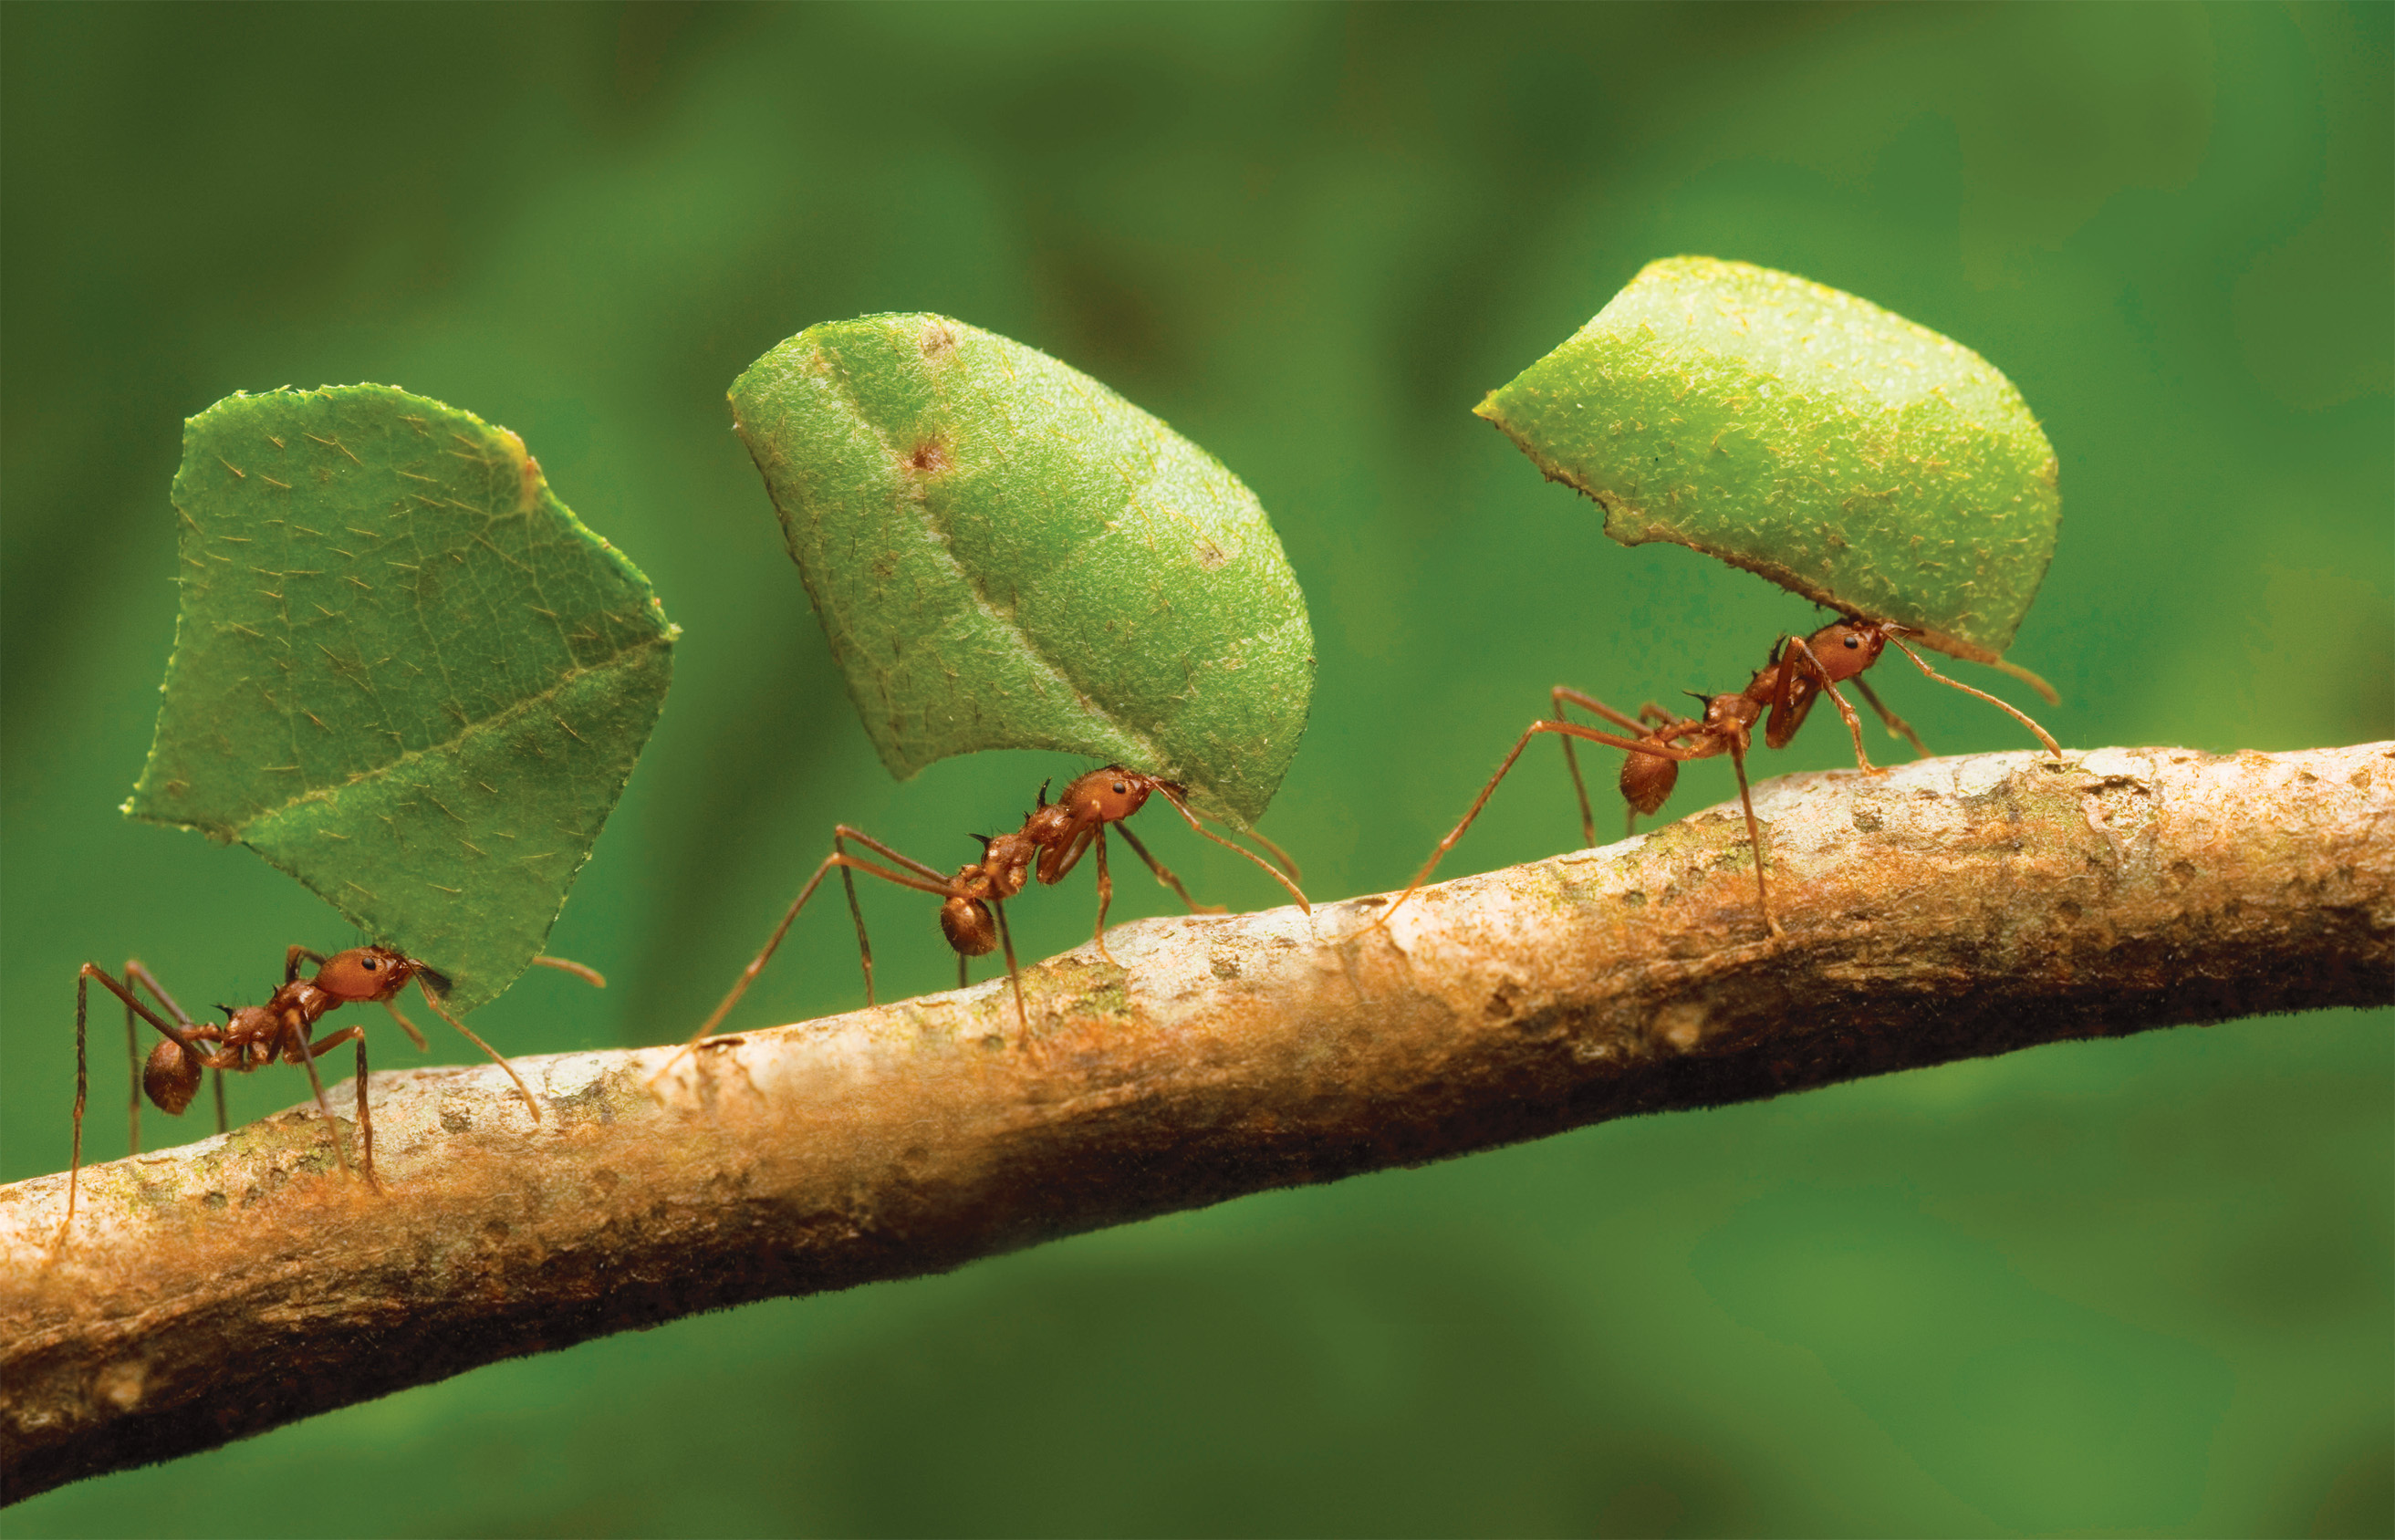 Ants working hard carrying leaves